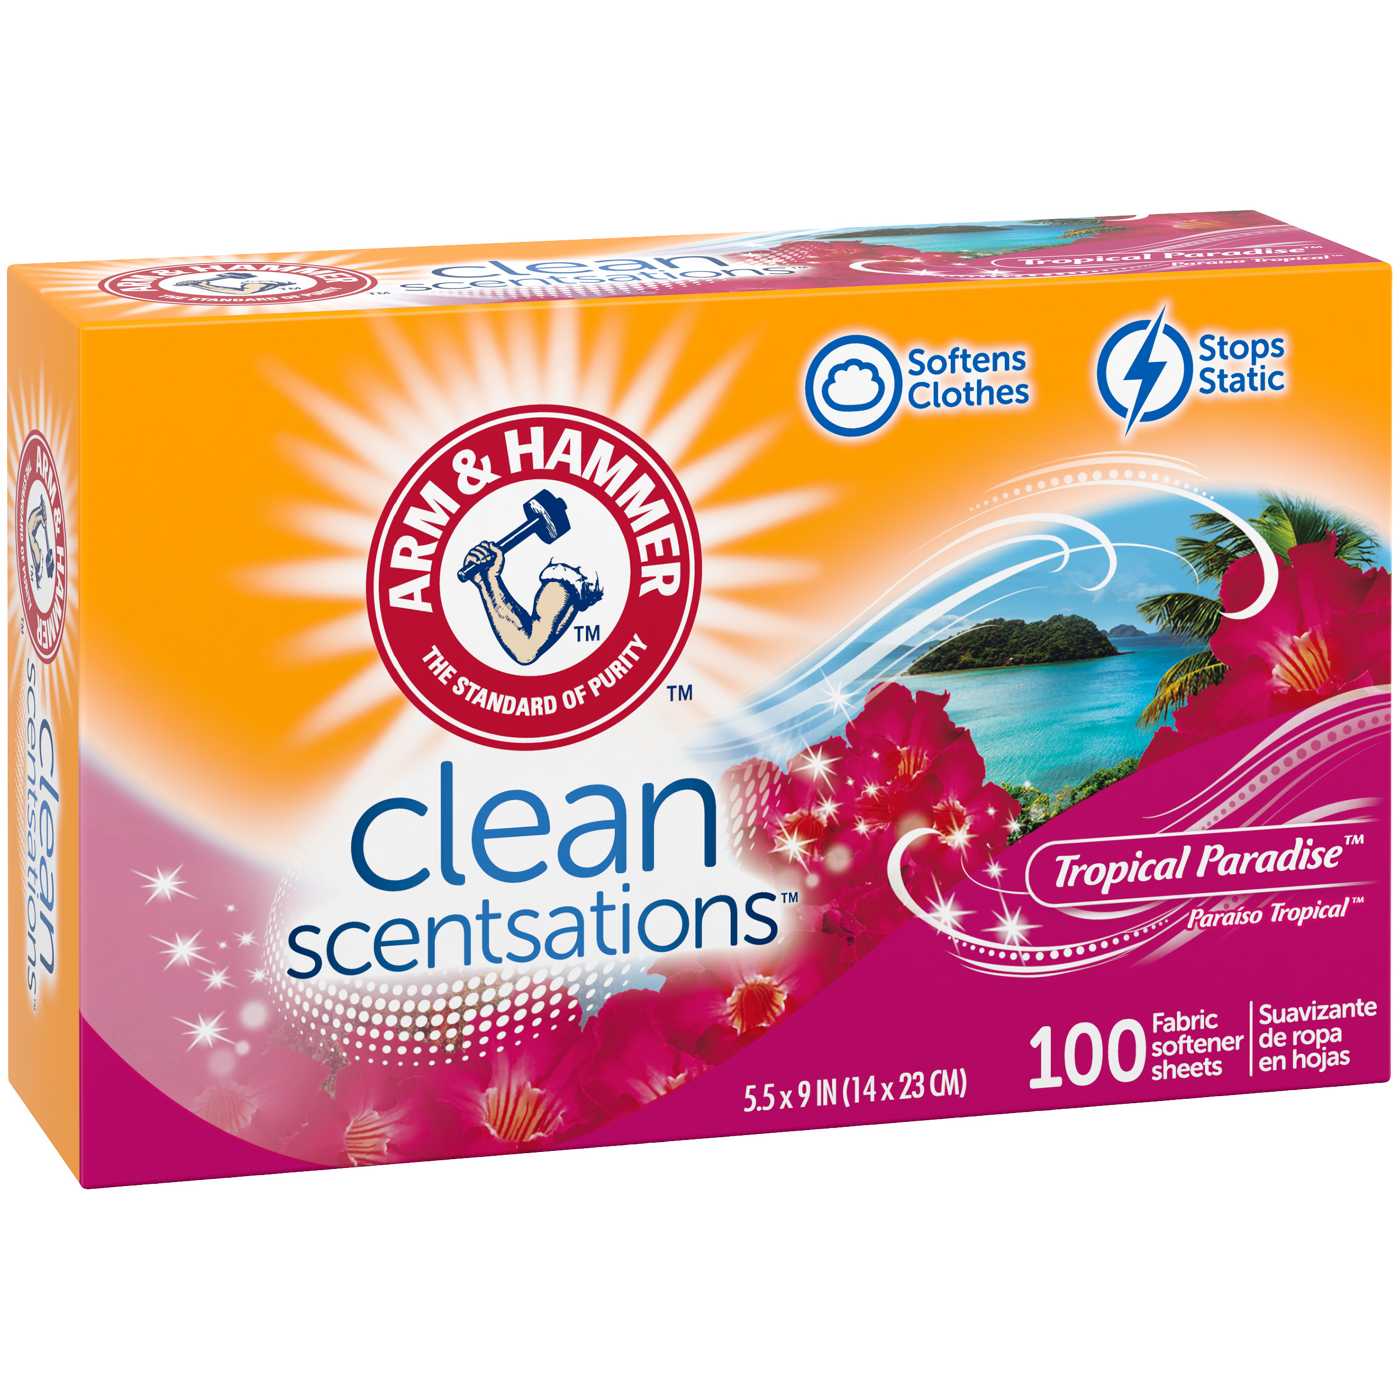 Arm & Hammer Clean Scentsations Fabric Softener Dryer Sheets - Tropical Paradise; image 2 of 2